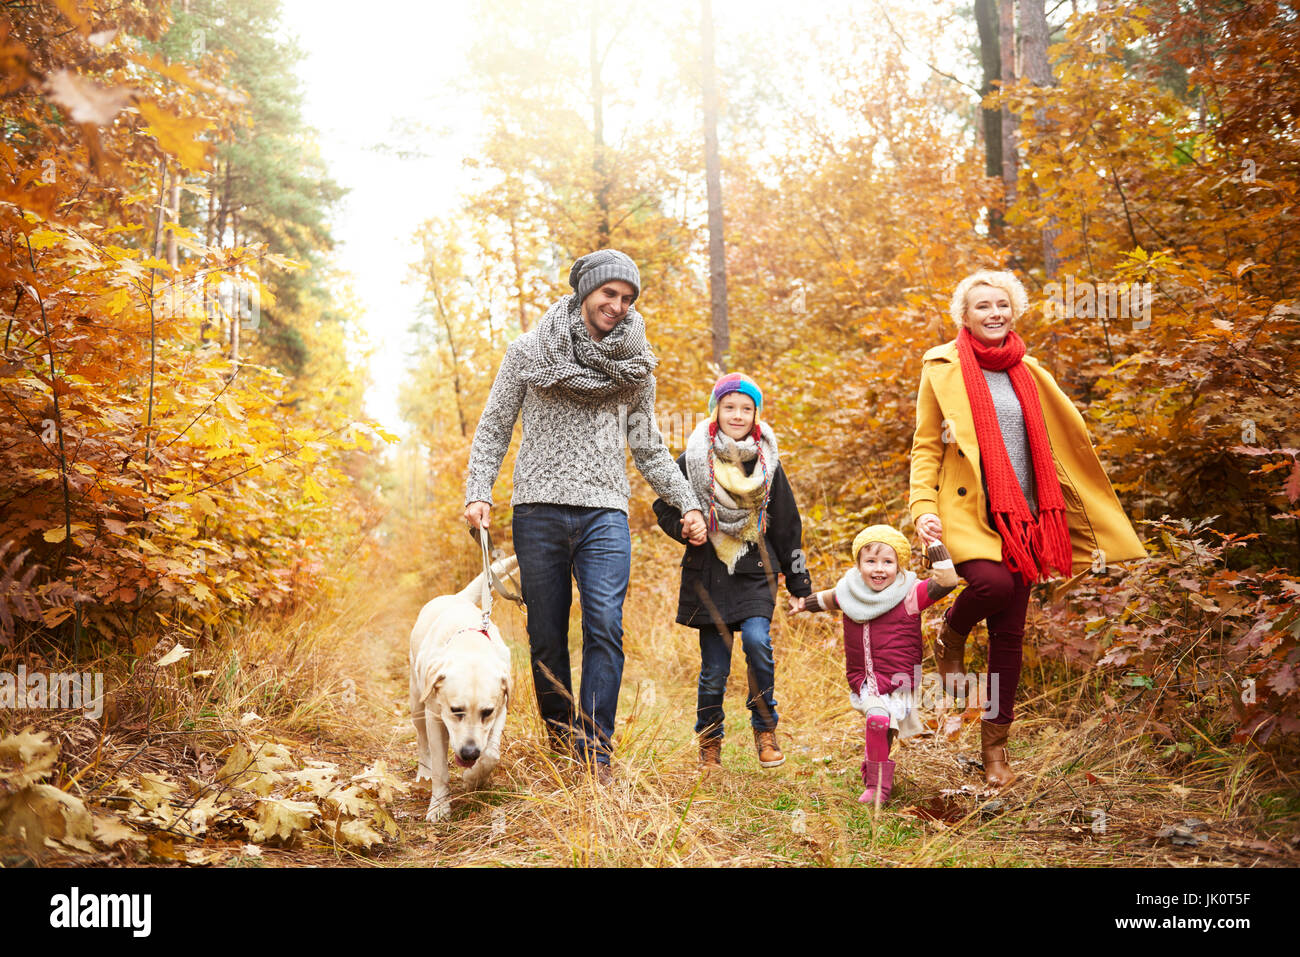 Family of four people walking a dog in forest Stock Photo